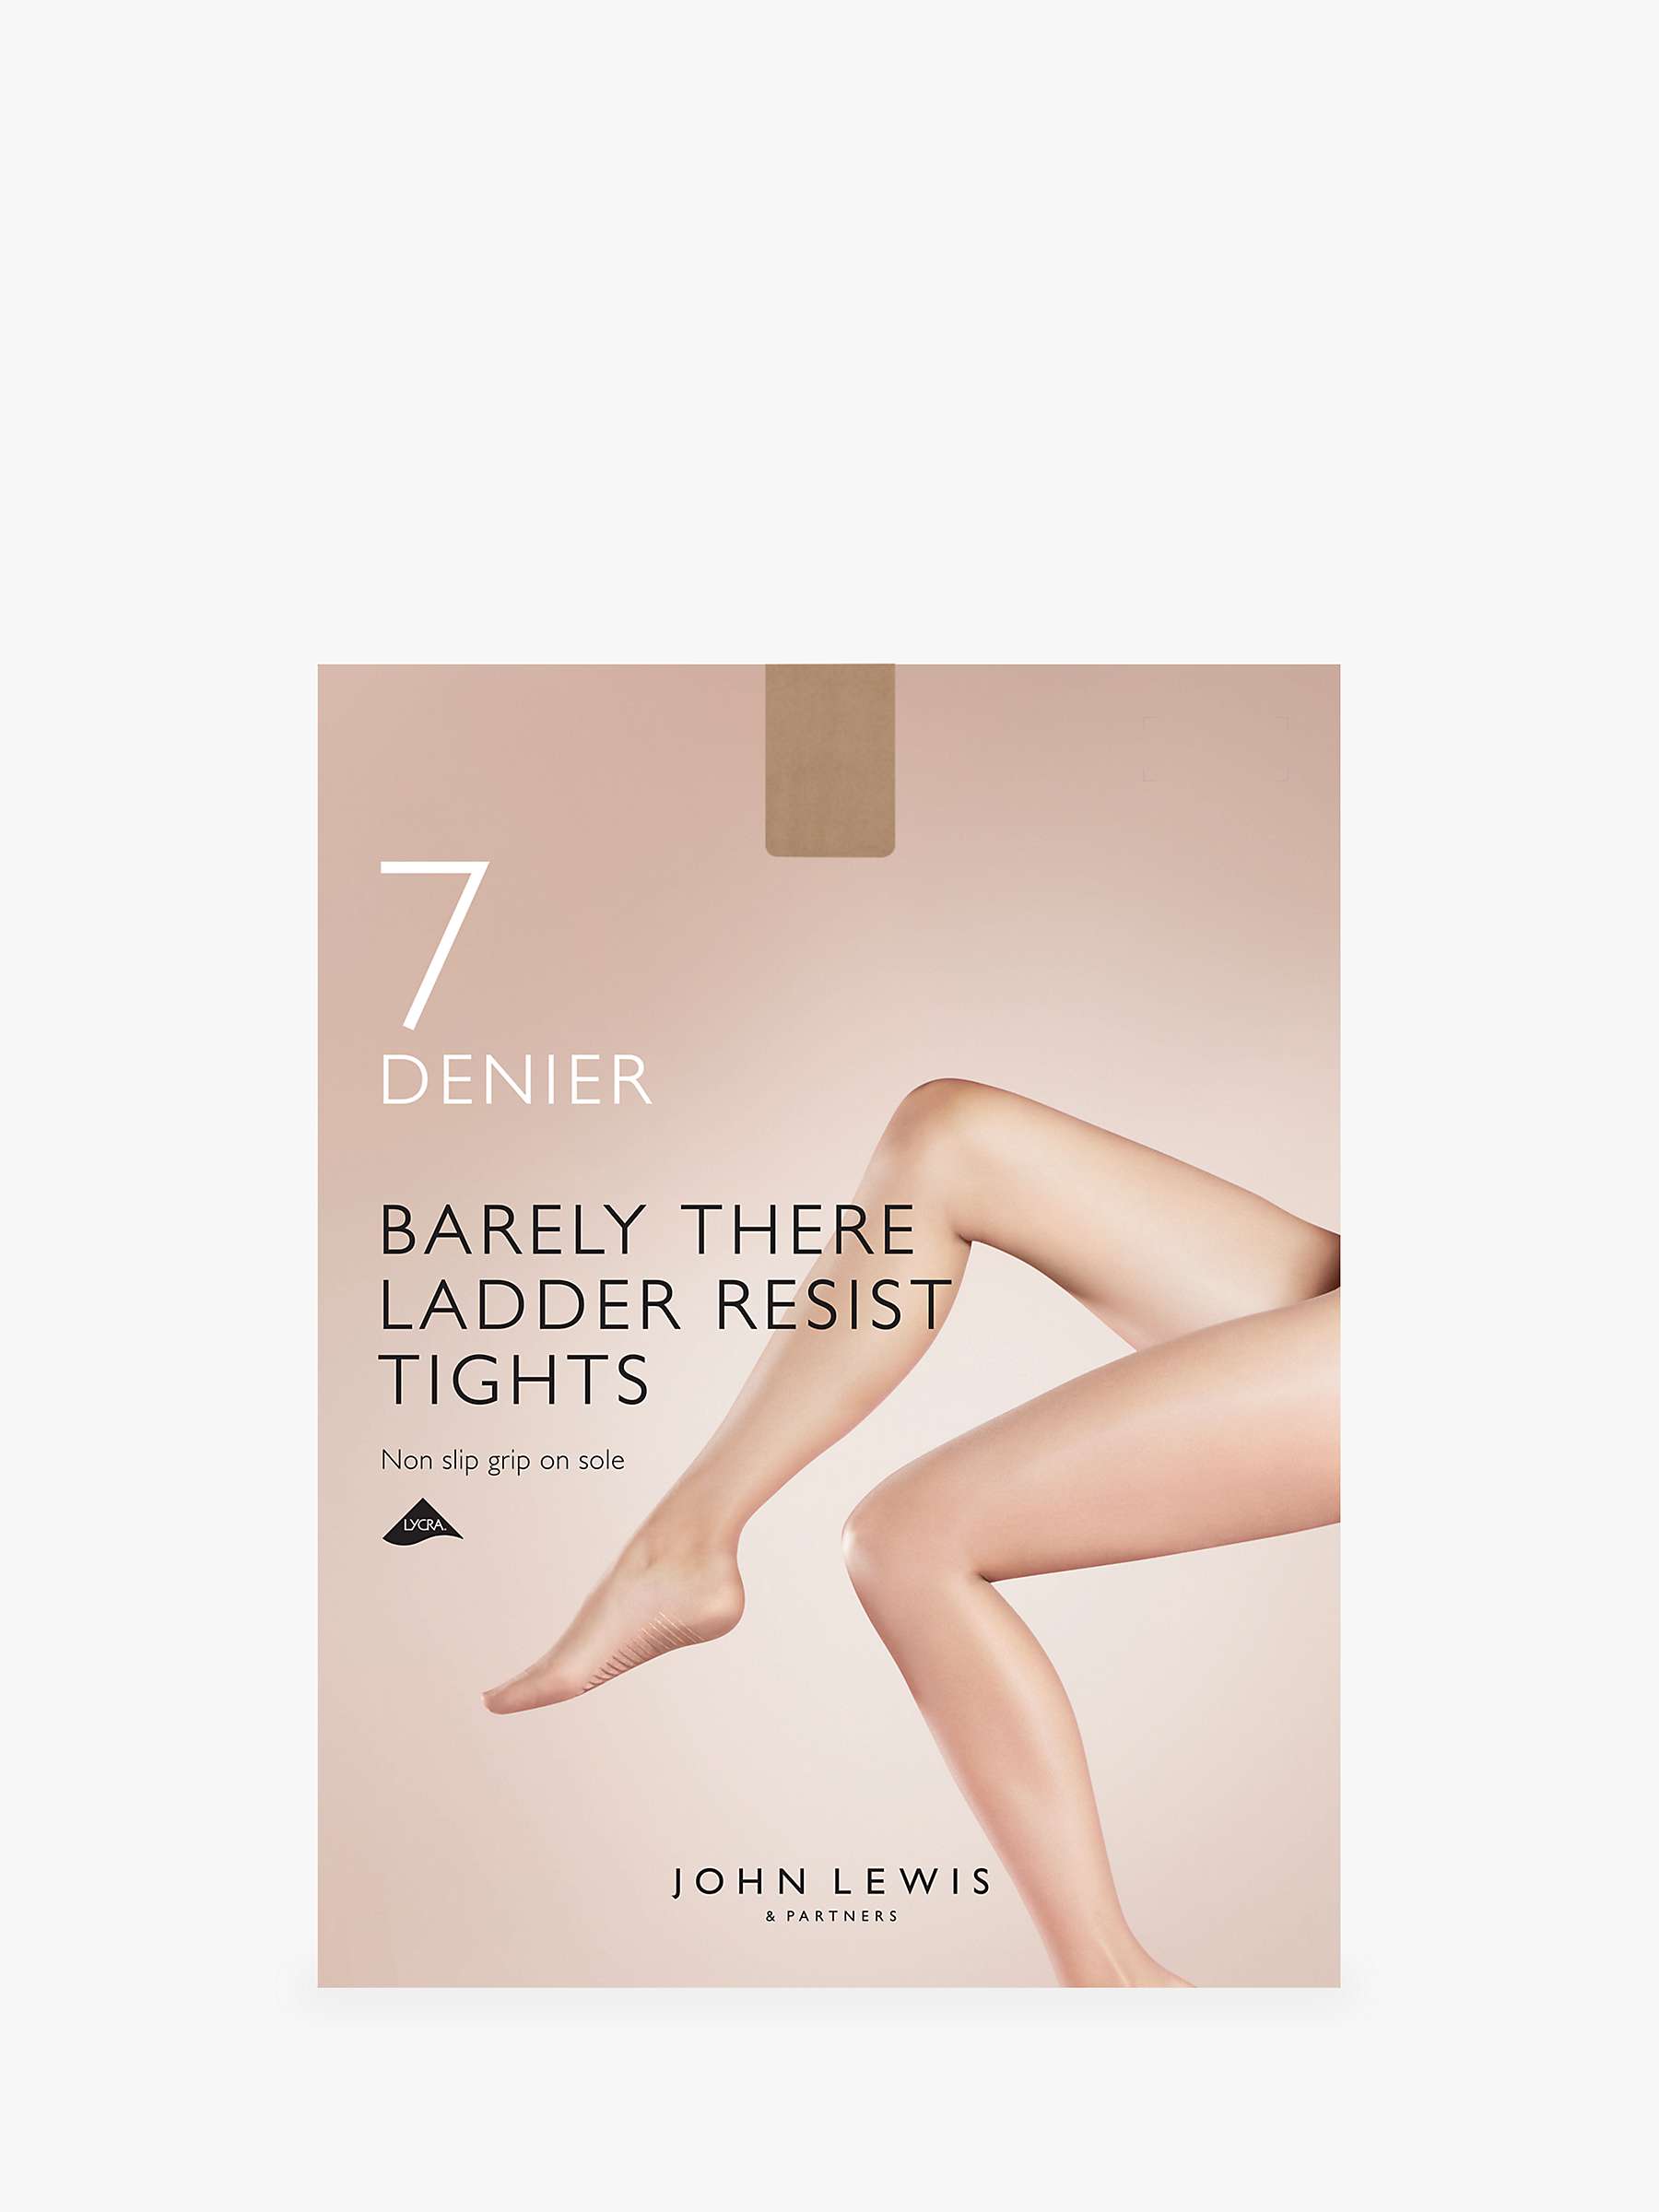 Buy John Lewis 7 Denier Barely There Ladder Resist Non-Slip Tights, Pack of 1 Online at johnlewis.com